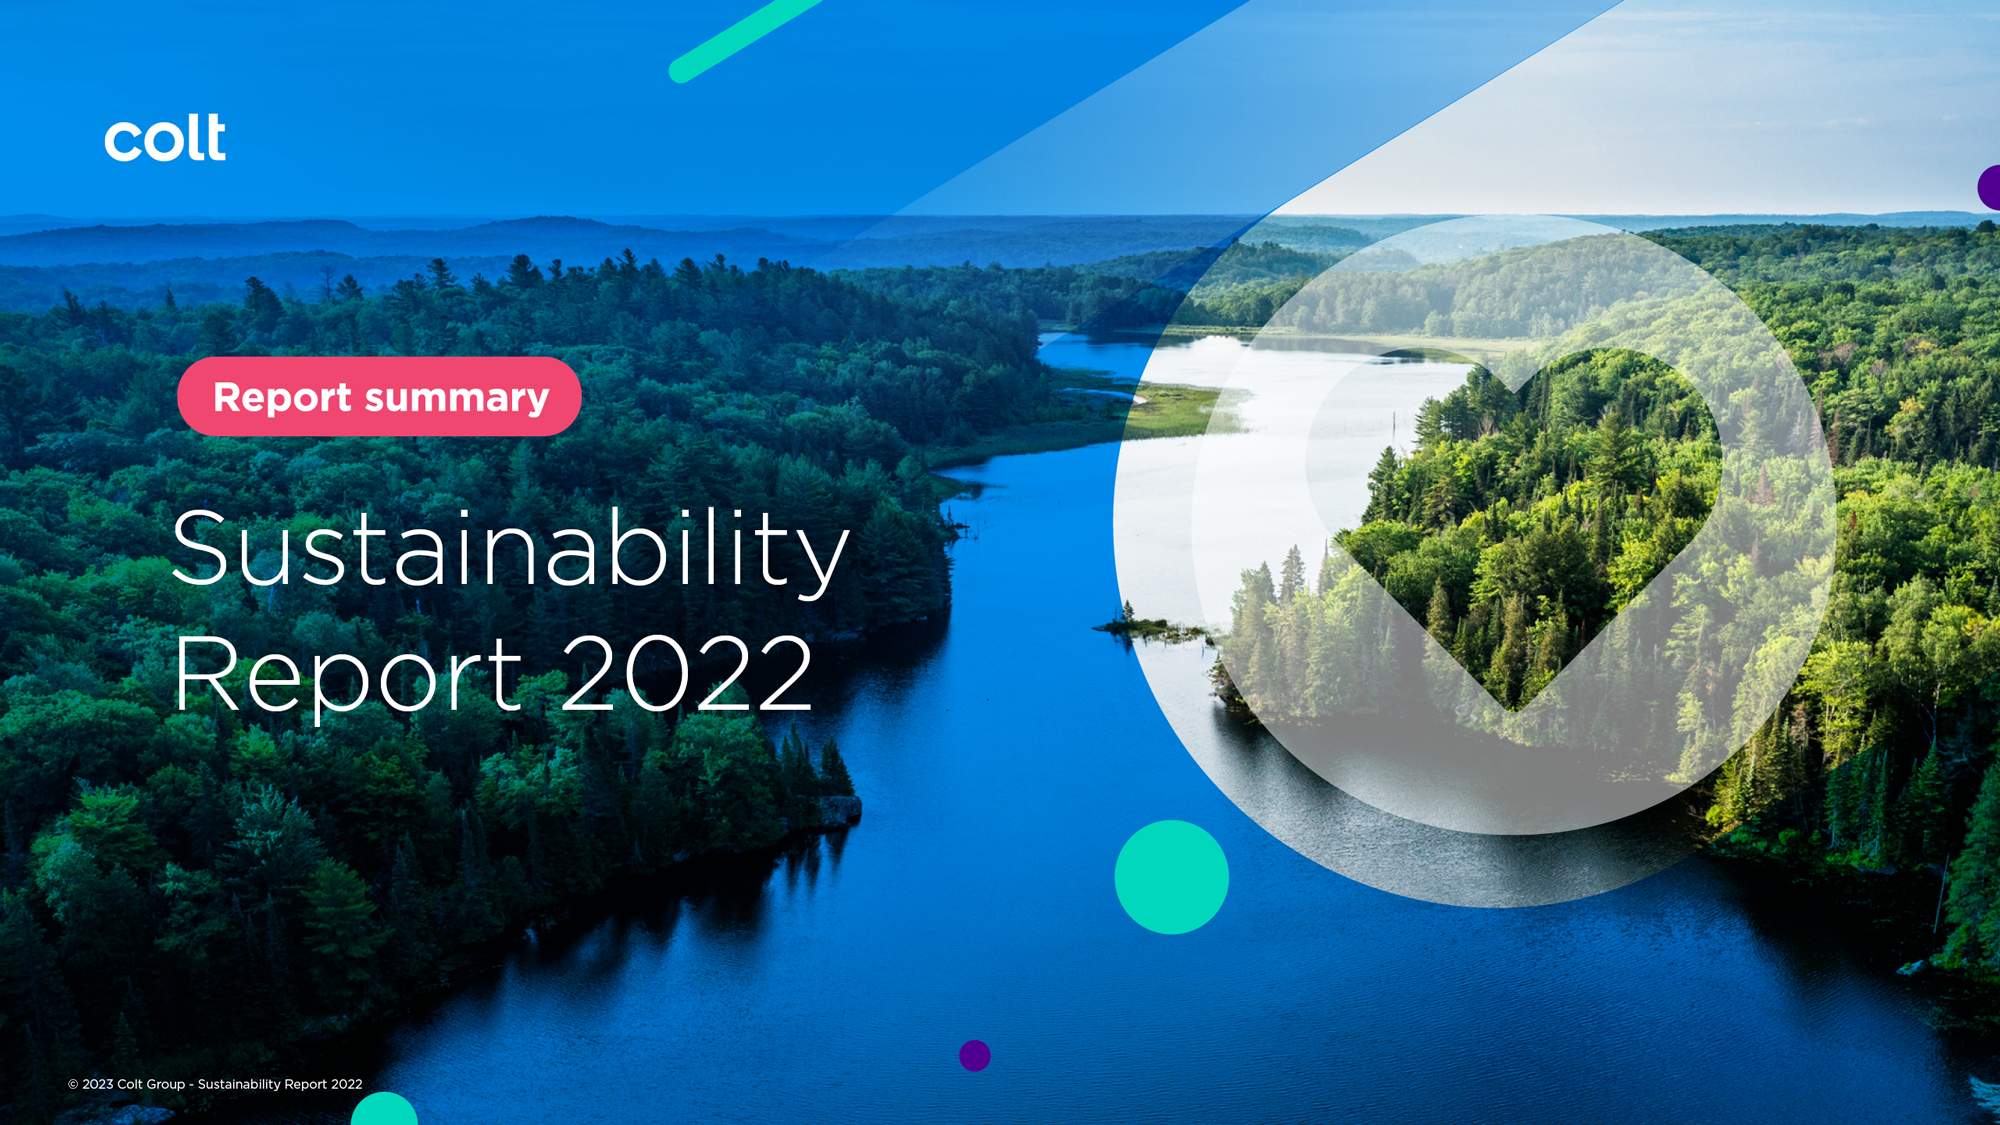 Image for the summary of Colt's 2022 sustainability report.